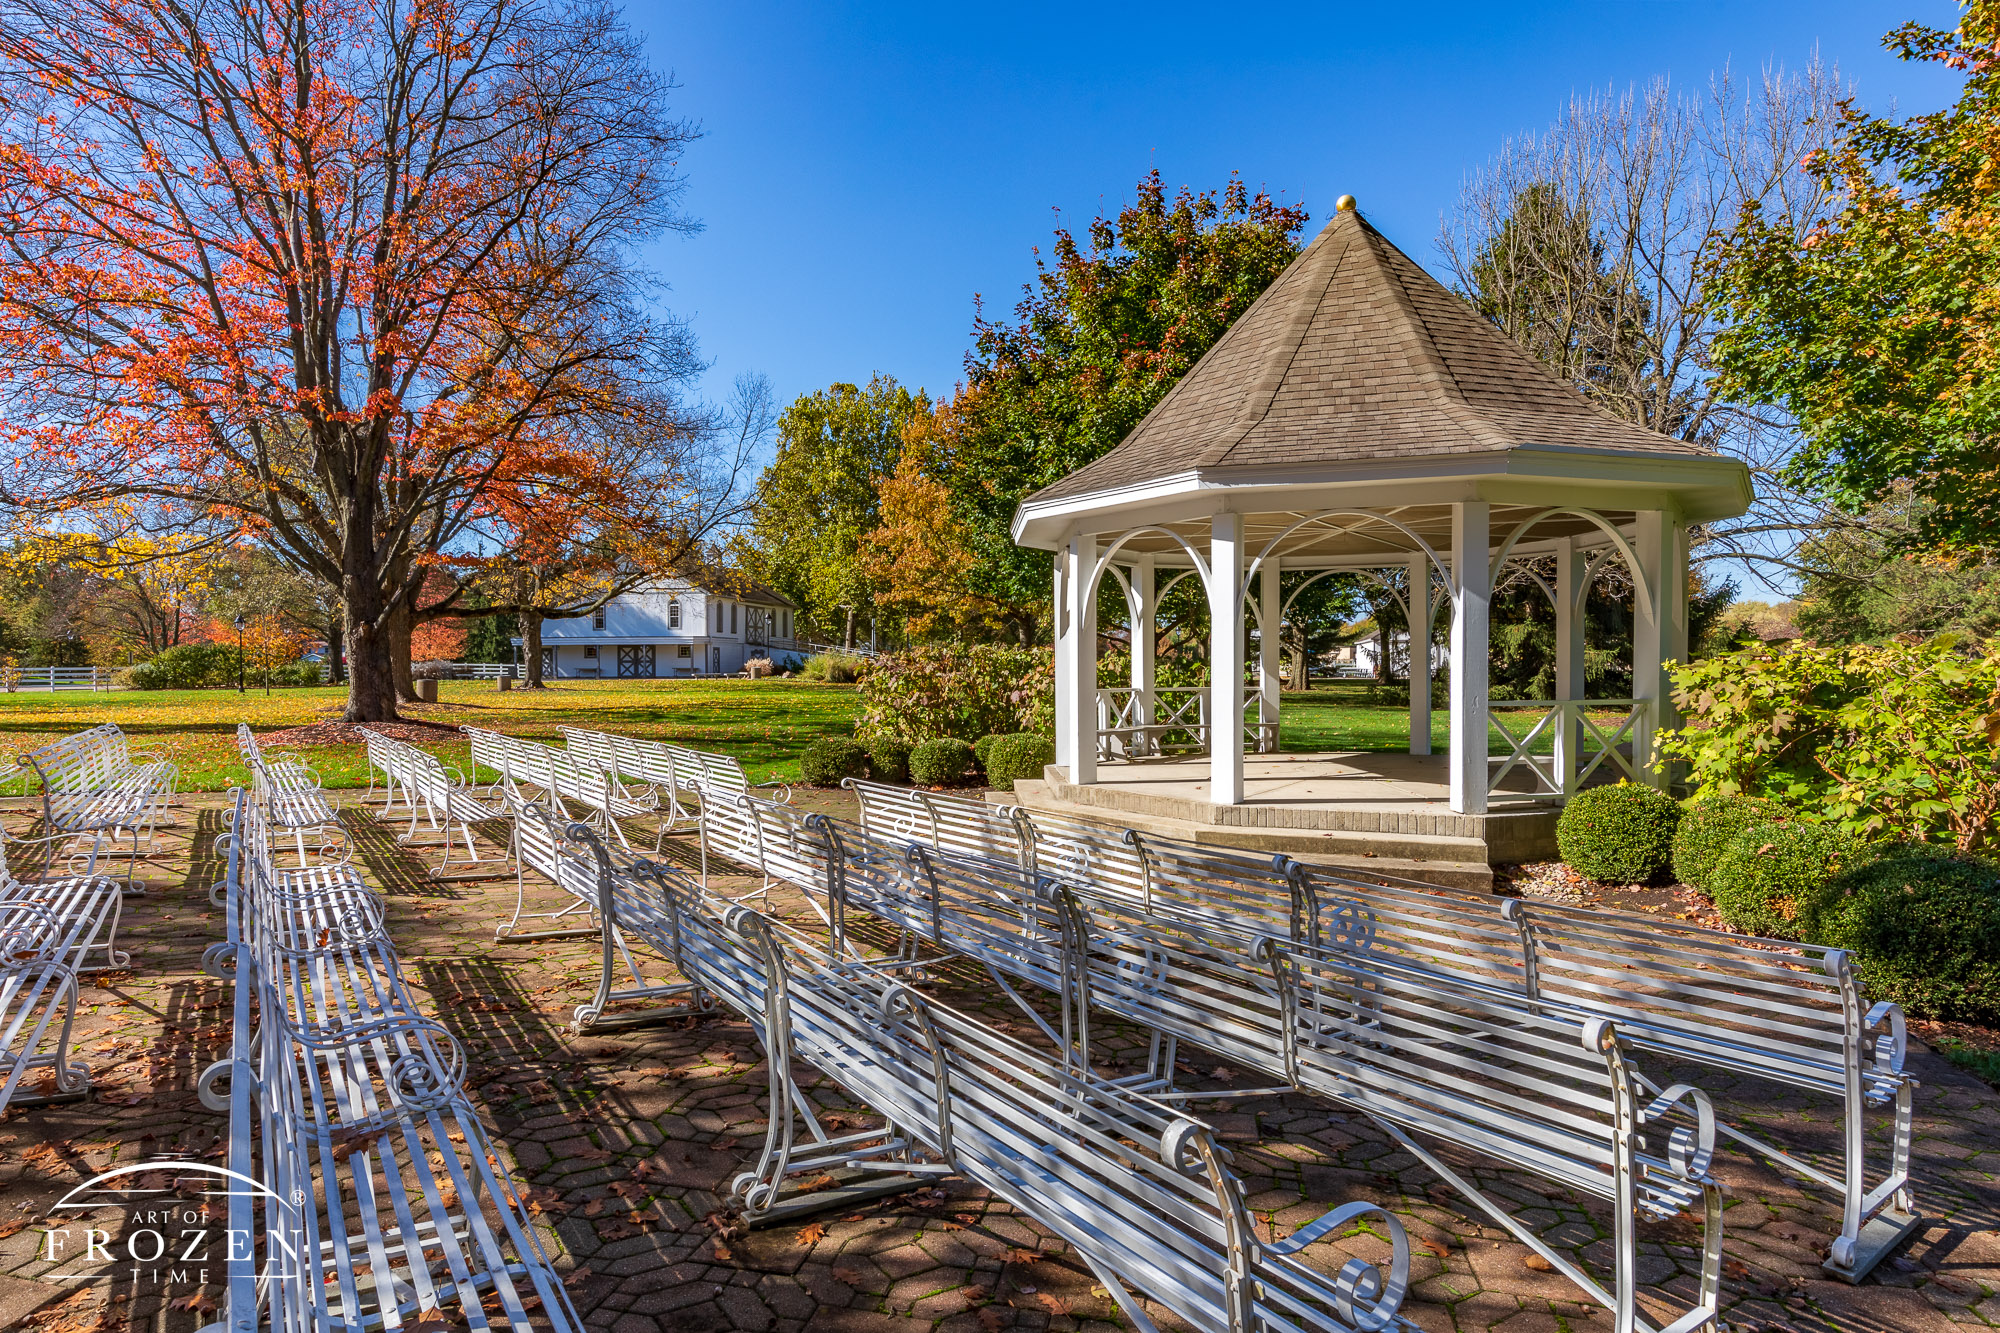 The gazebo at Polen Farms, Kettering Ohio, under autumn colors and fall lighting where the benches are ortiented for guest to witness special occasions.